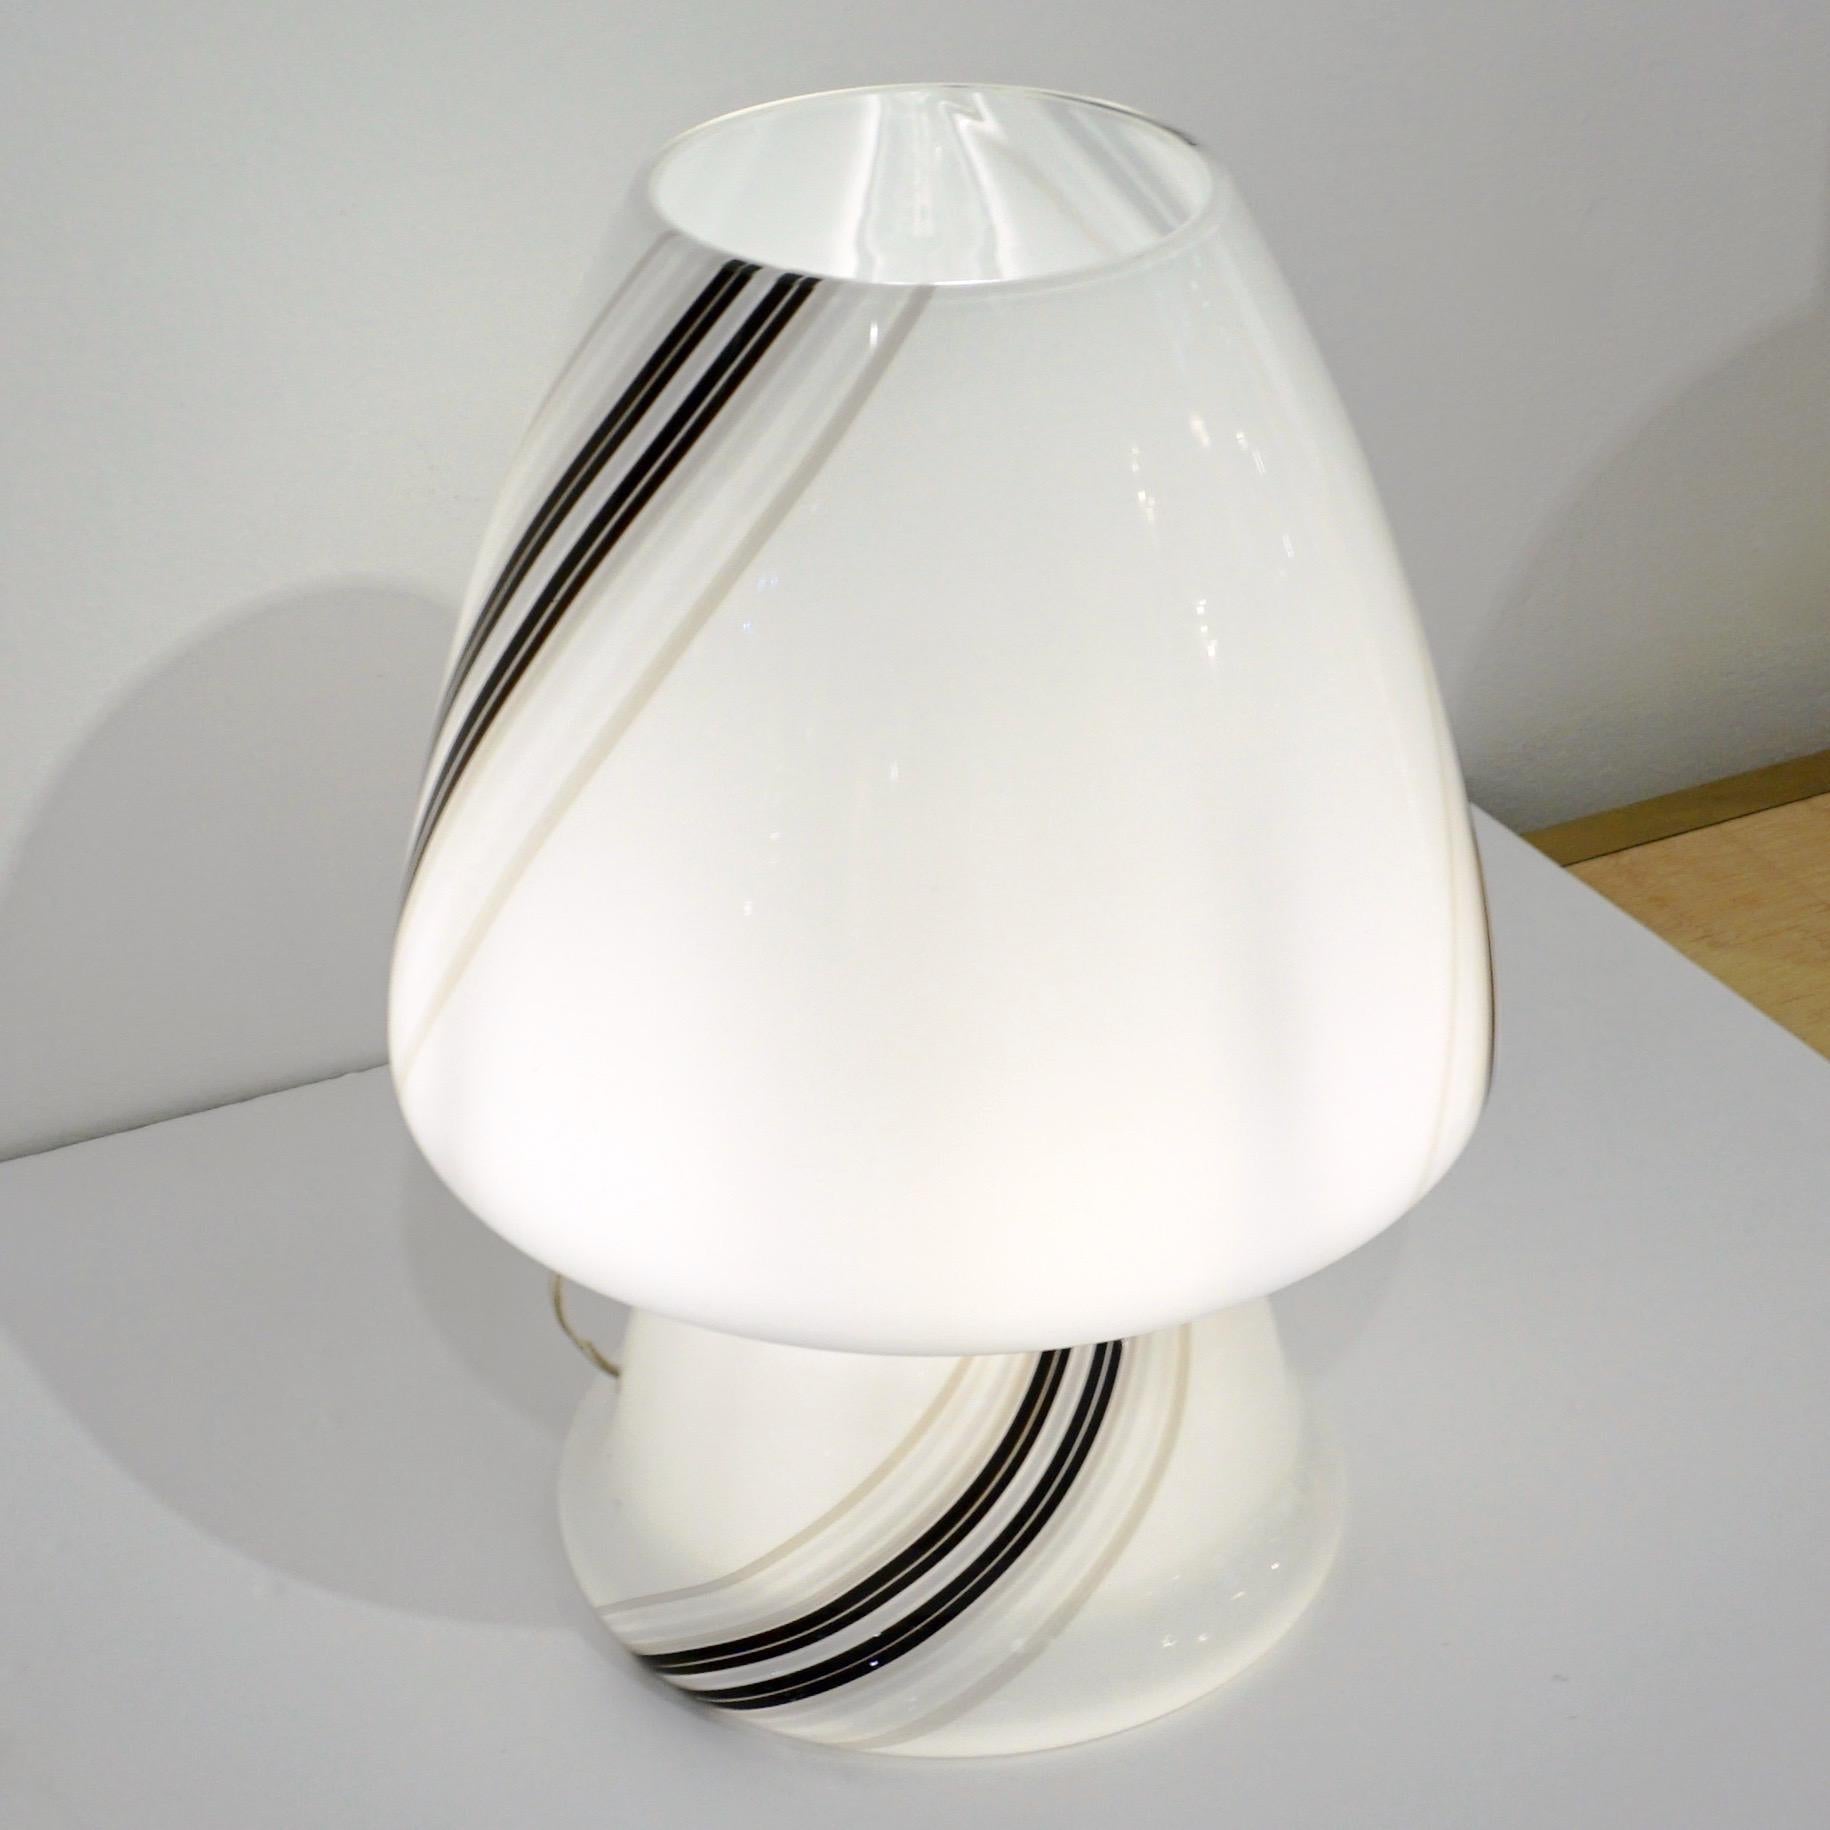 A delightful mid-20th century modern Italian design table lamp, attributed to Vistosi, of organic conical mushroom shape, skillfully blown as a whole single piece in white Murano glass artistically decorated with elegant swirling black and grey